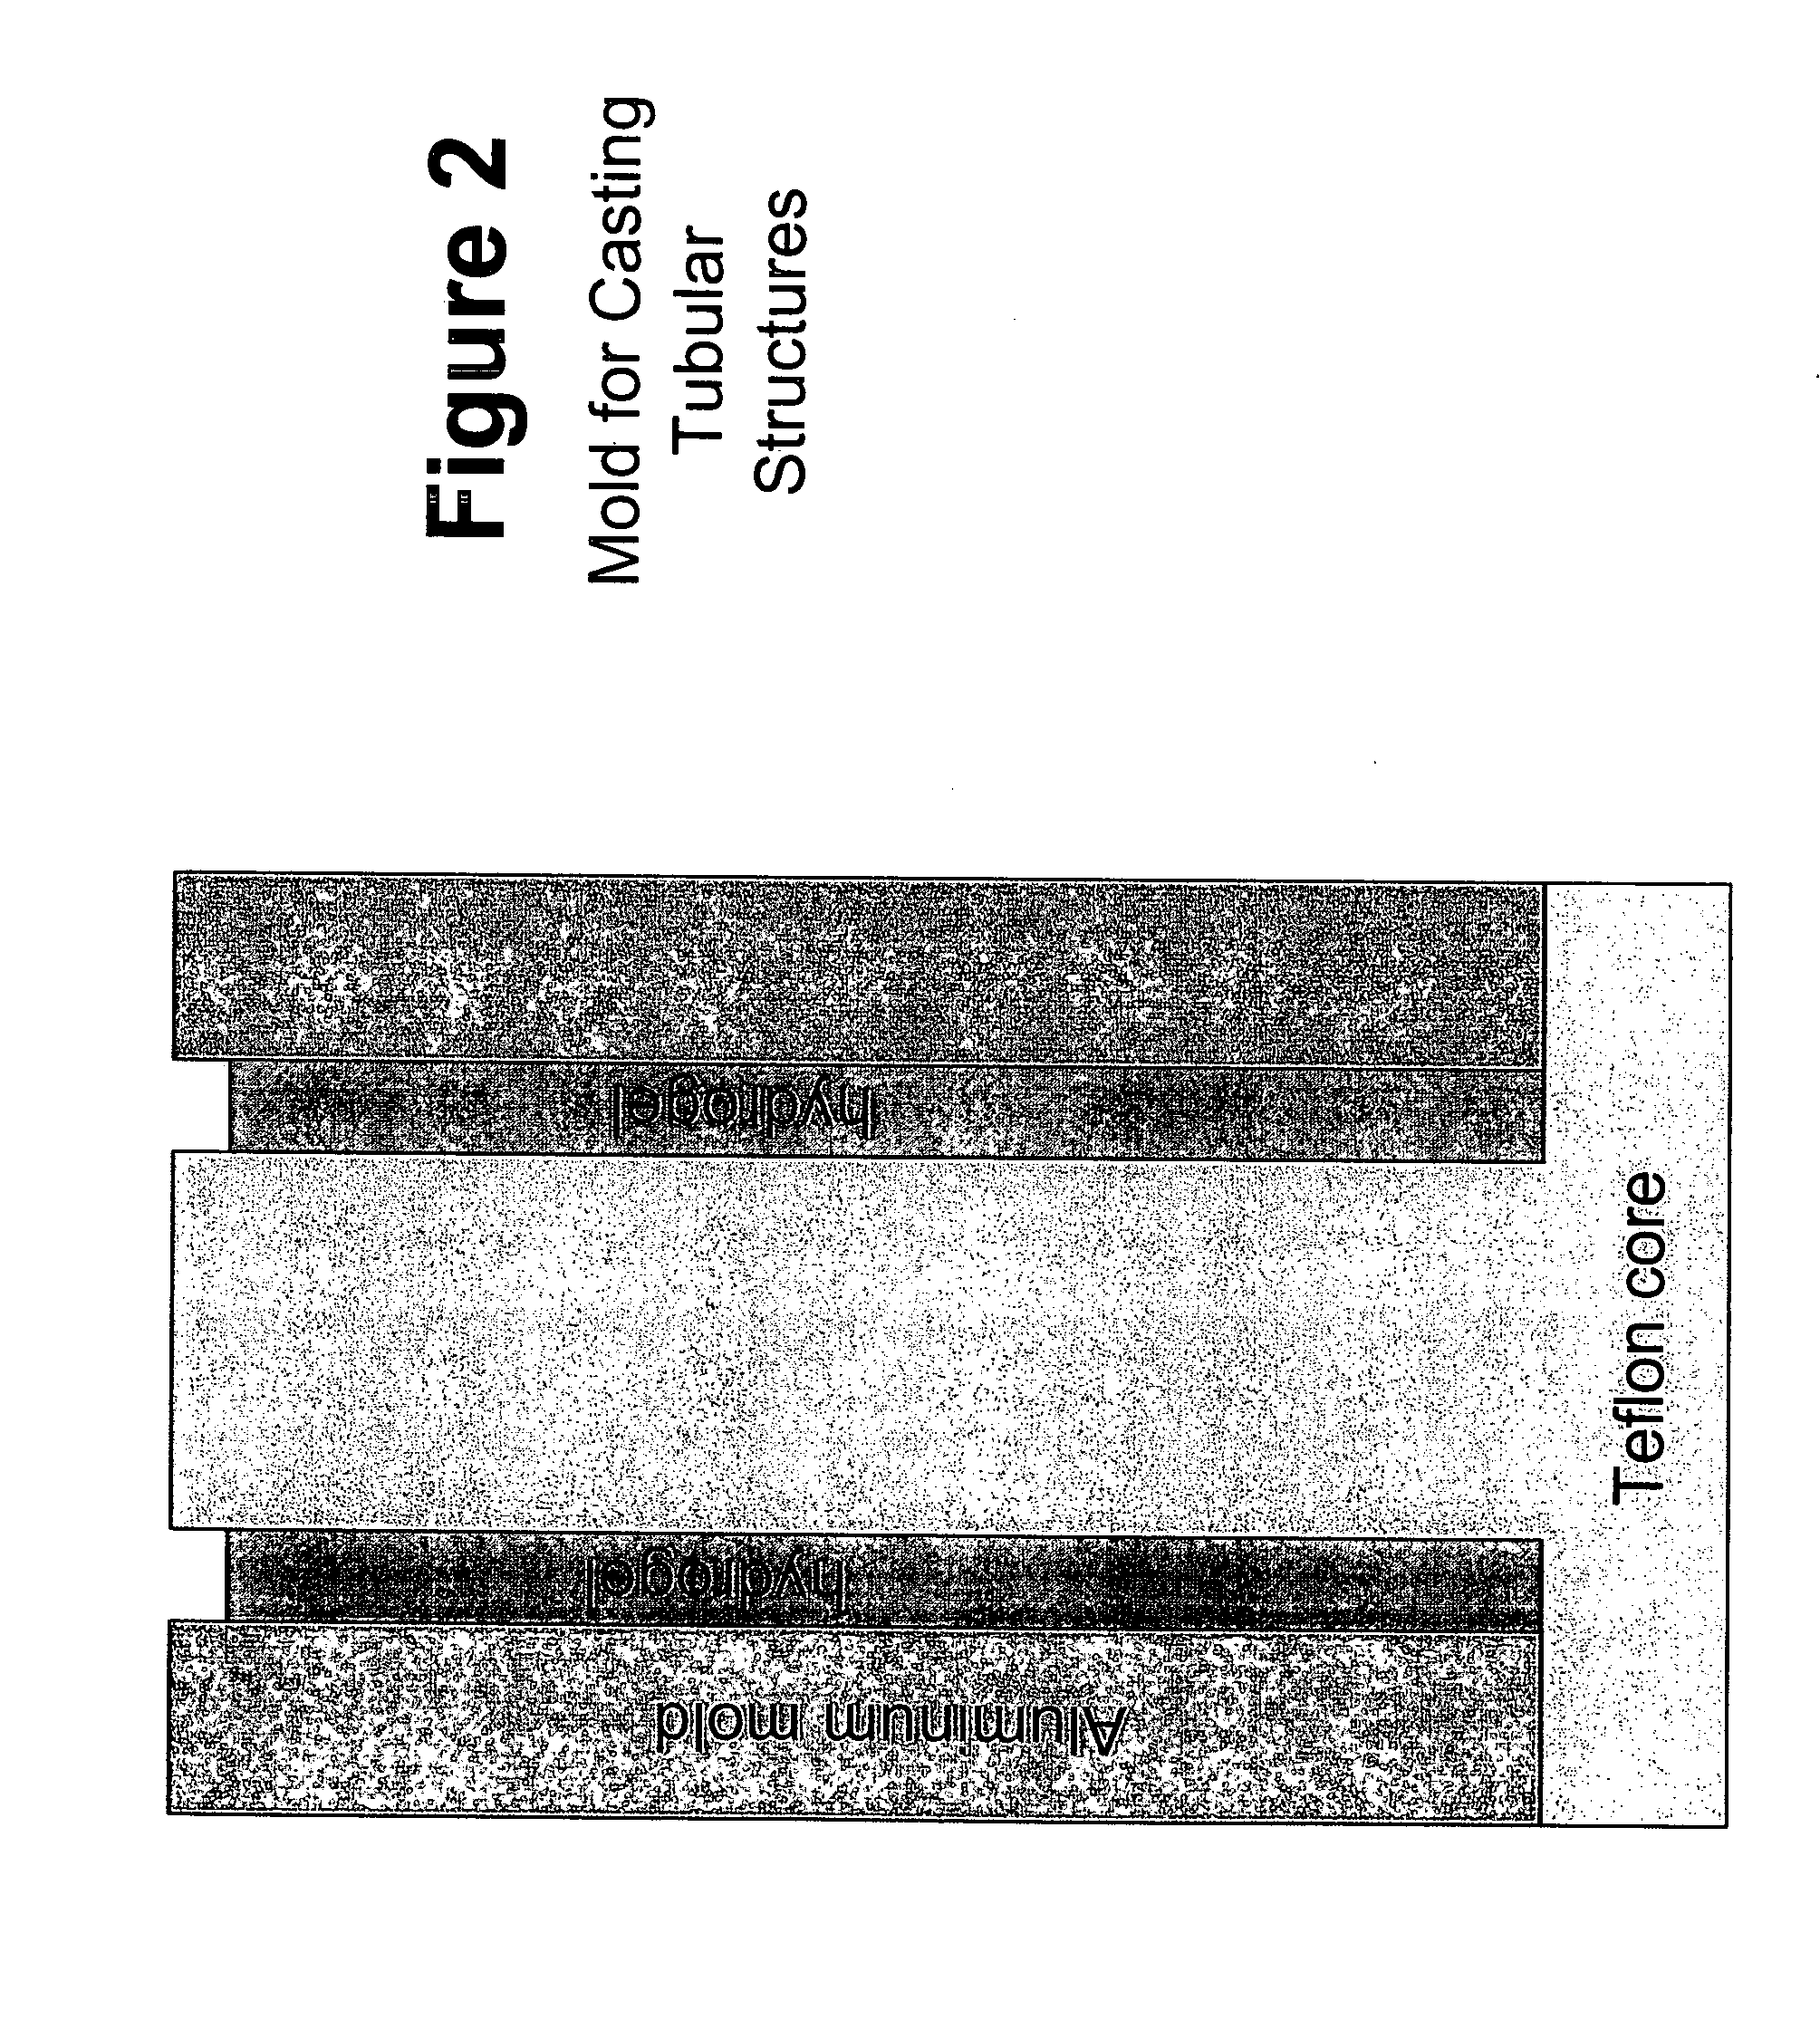 Biocompatible polymers and Methods of use